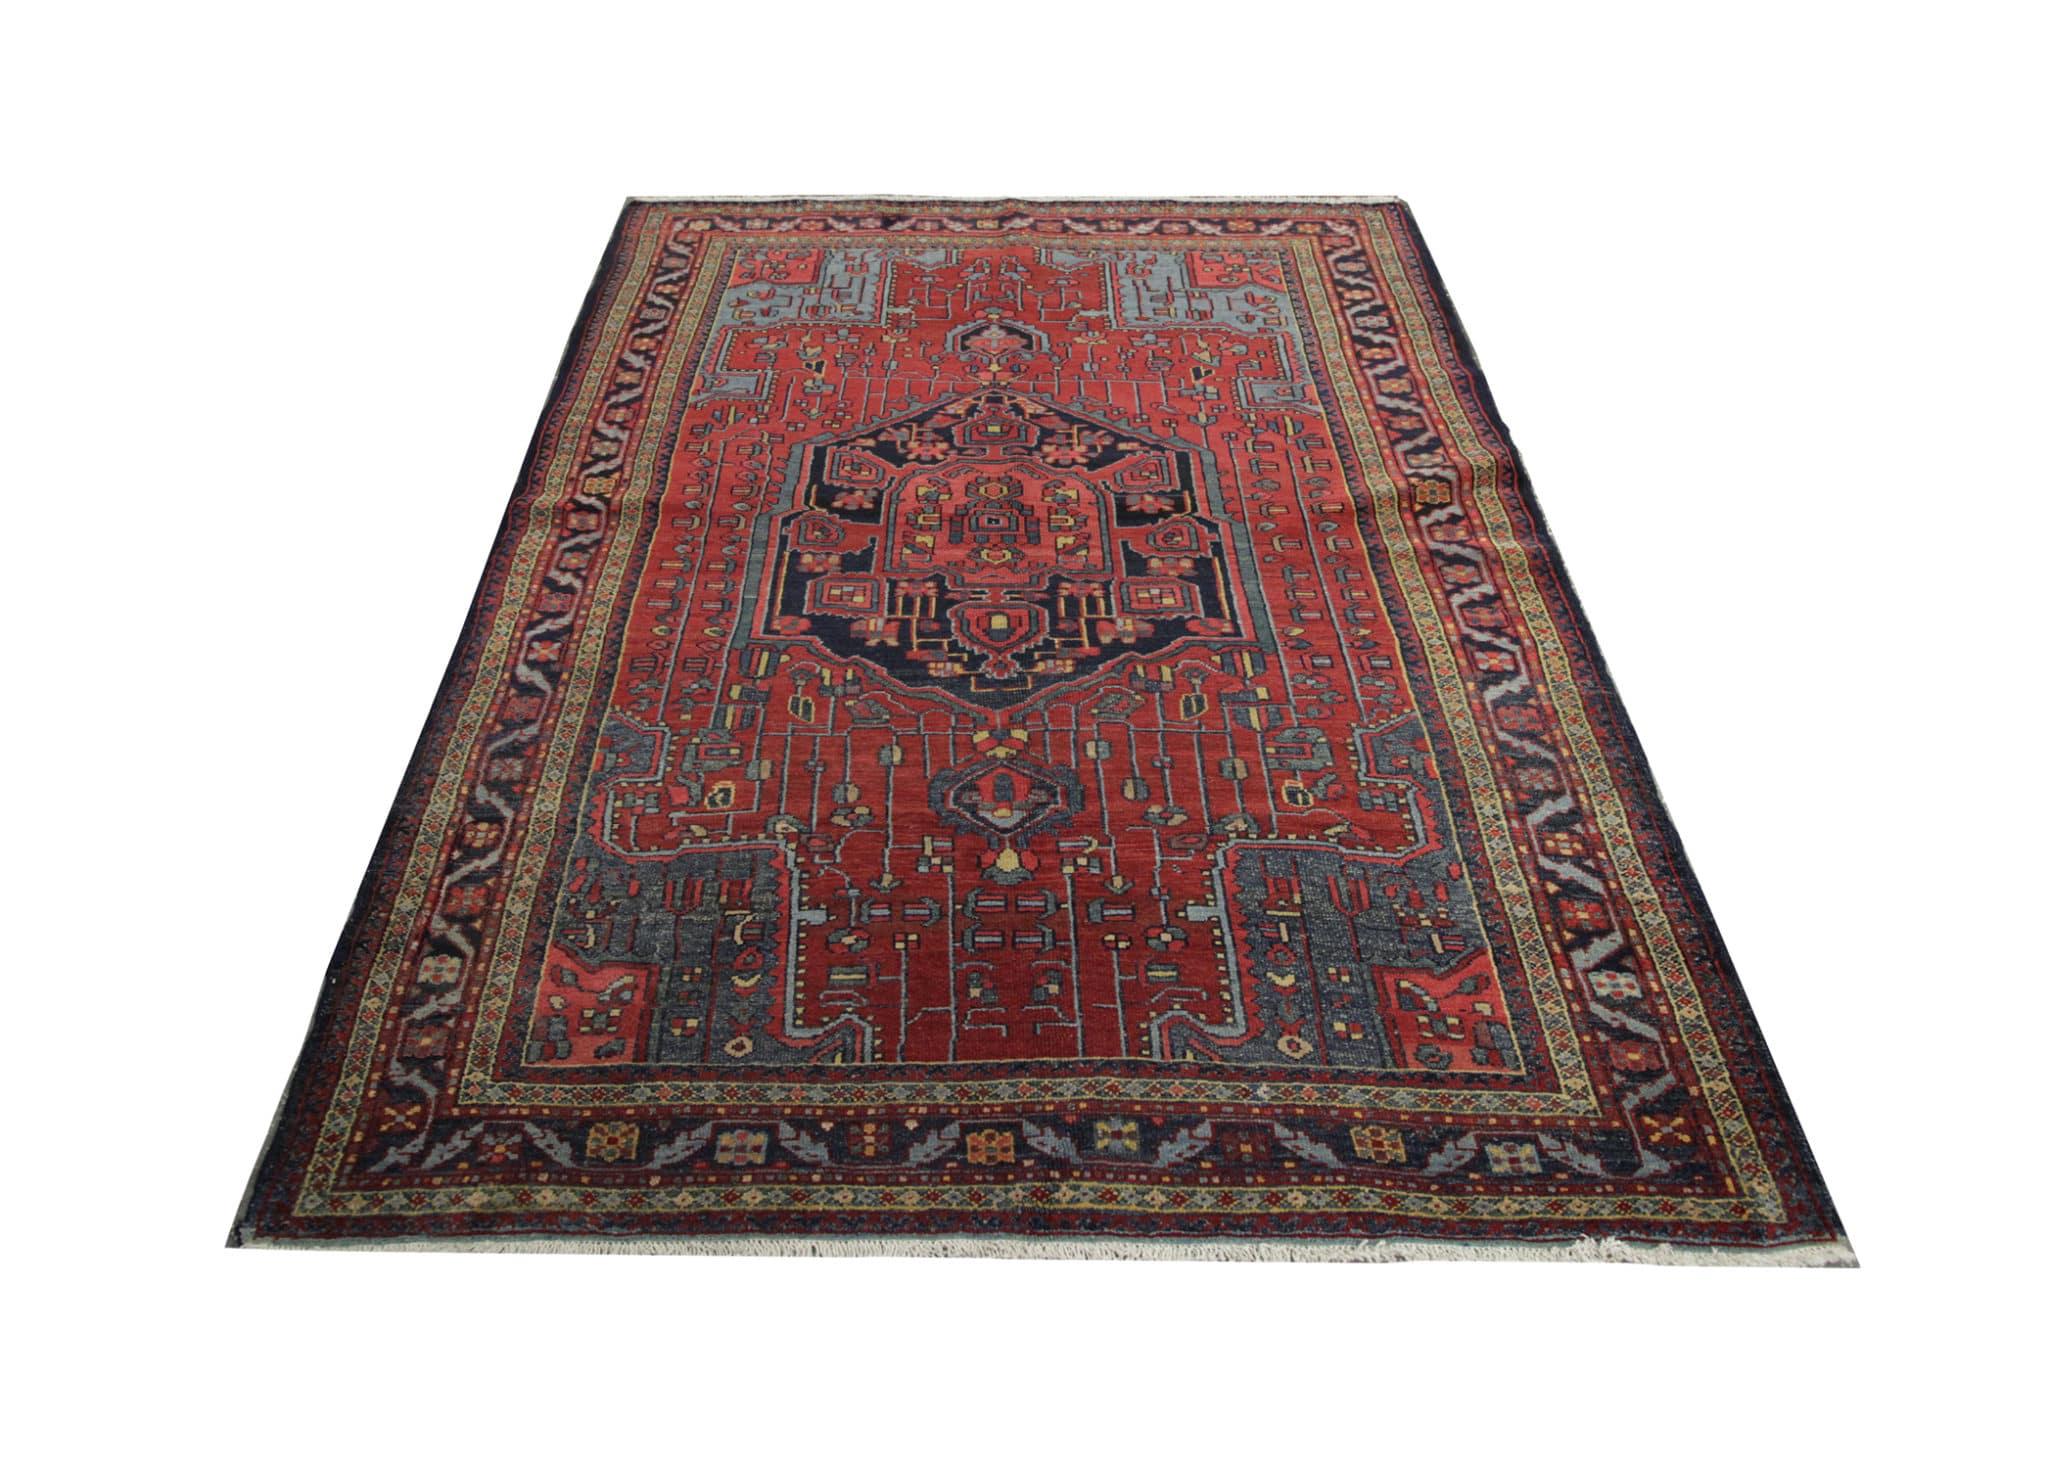 Bring timeless elegance into your living space with our antique rug, a stunning hand-knotted masterpiece crafted in the 1920s. This vintage rug boasts exquisite details and a rich history, making it a captivating centerpiece for any room. The